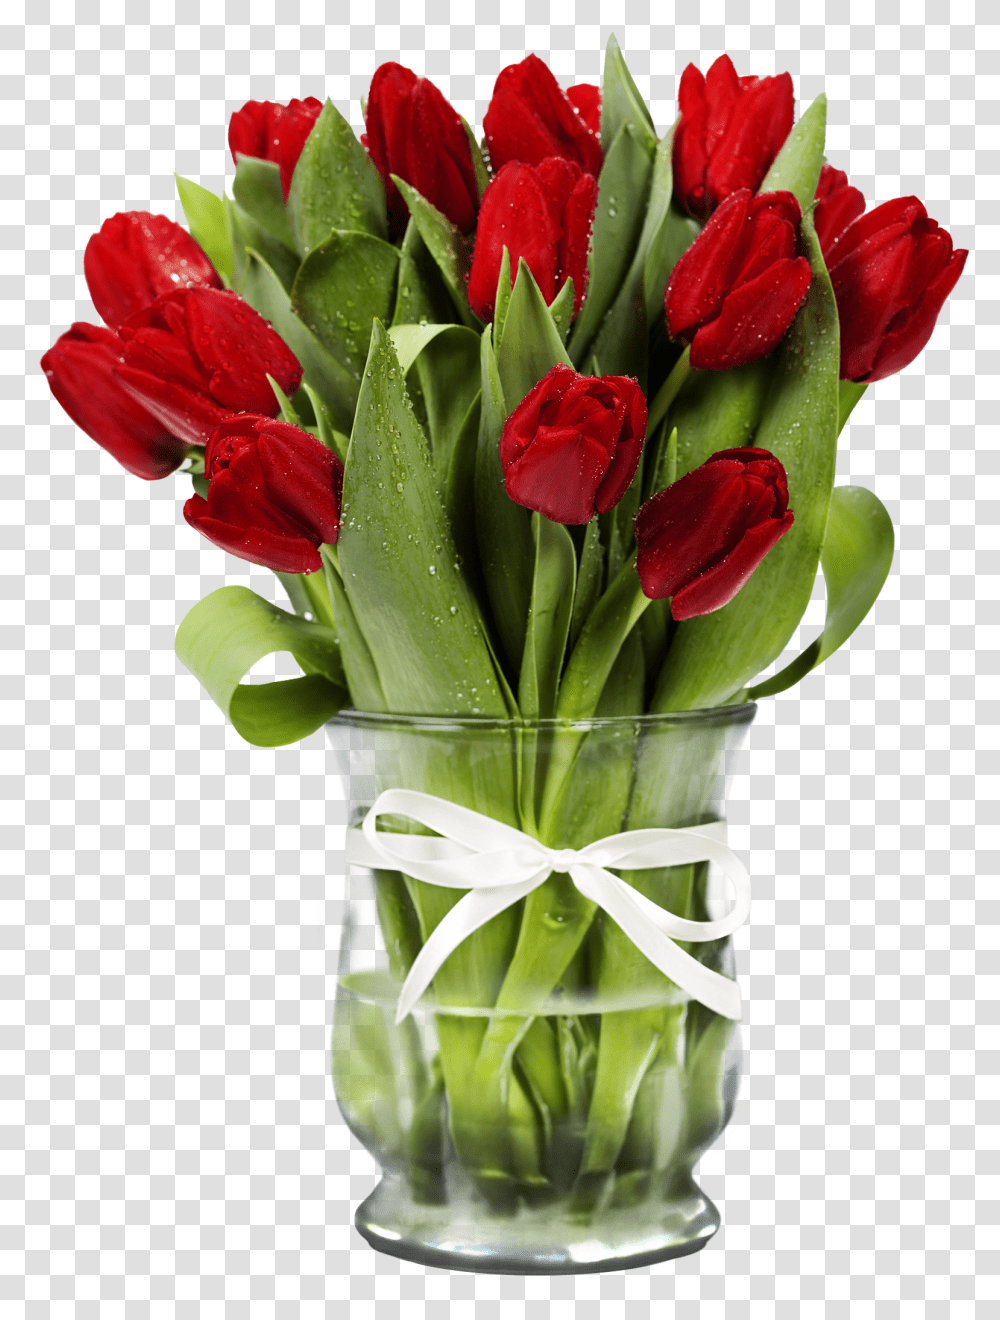 Flowers In Vase Picture Vase Of Flowers Transparent Png